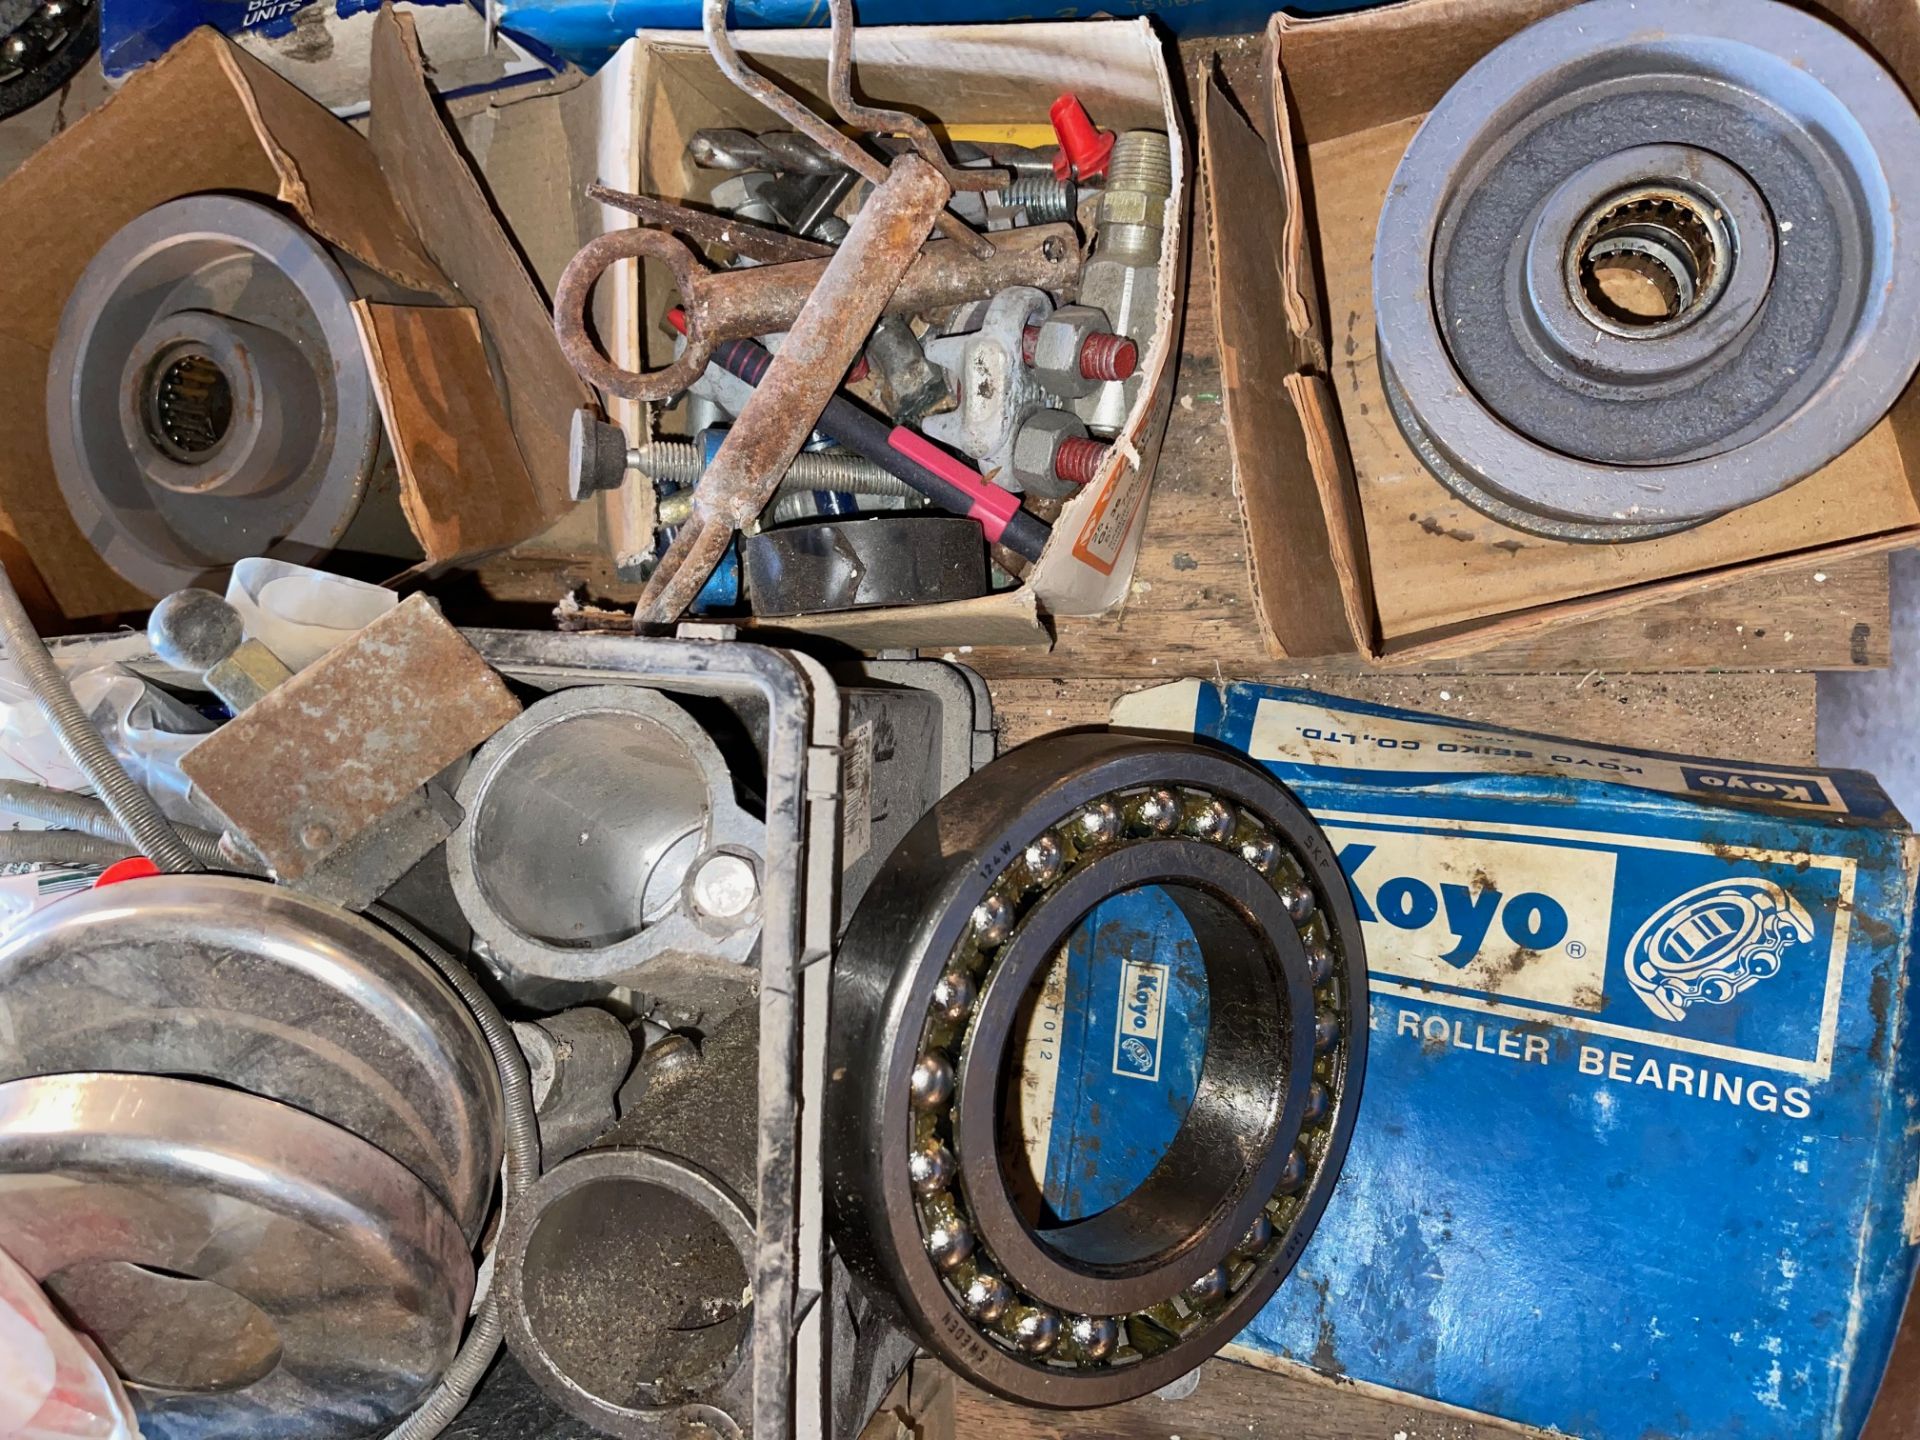 ASSORTED BEARING AND BUSHINGS, IDLER PULLEYS,SHAFT, BROWNING, PULLEYS, WELDING HELMETS - Image 3 of 7